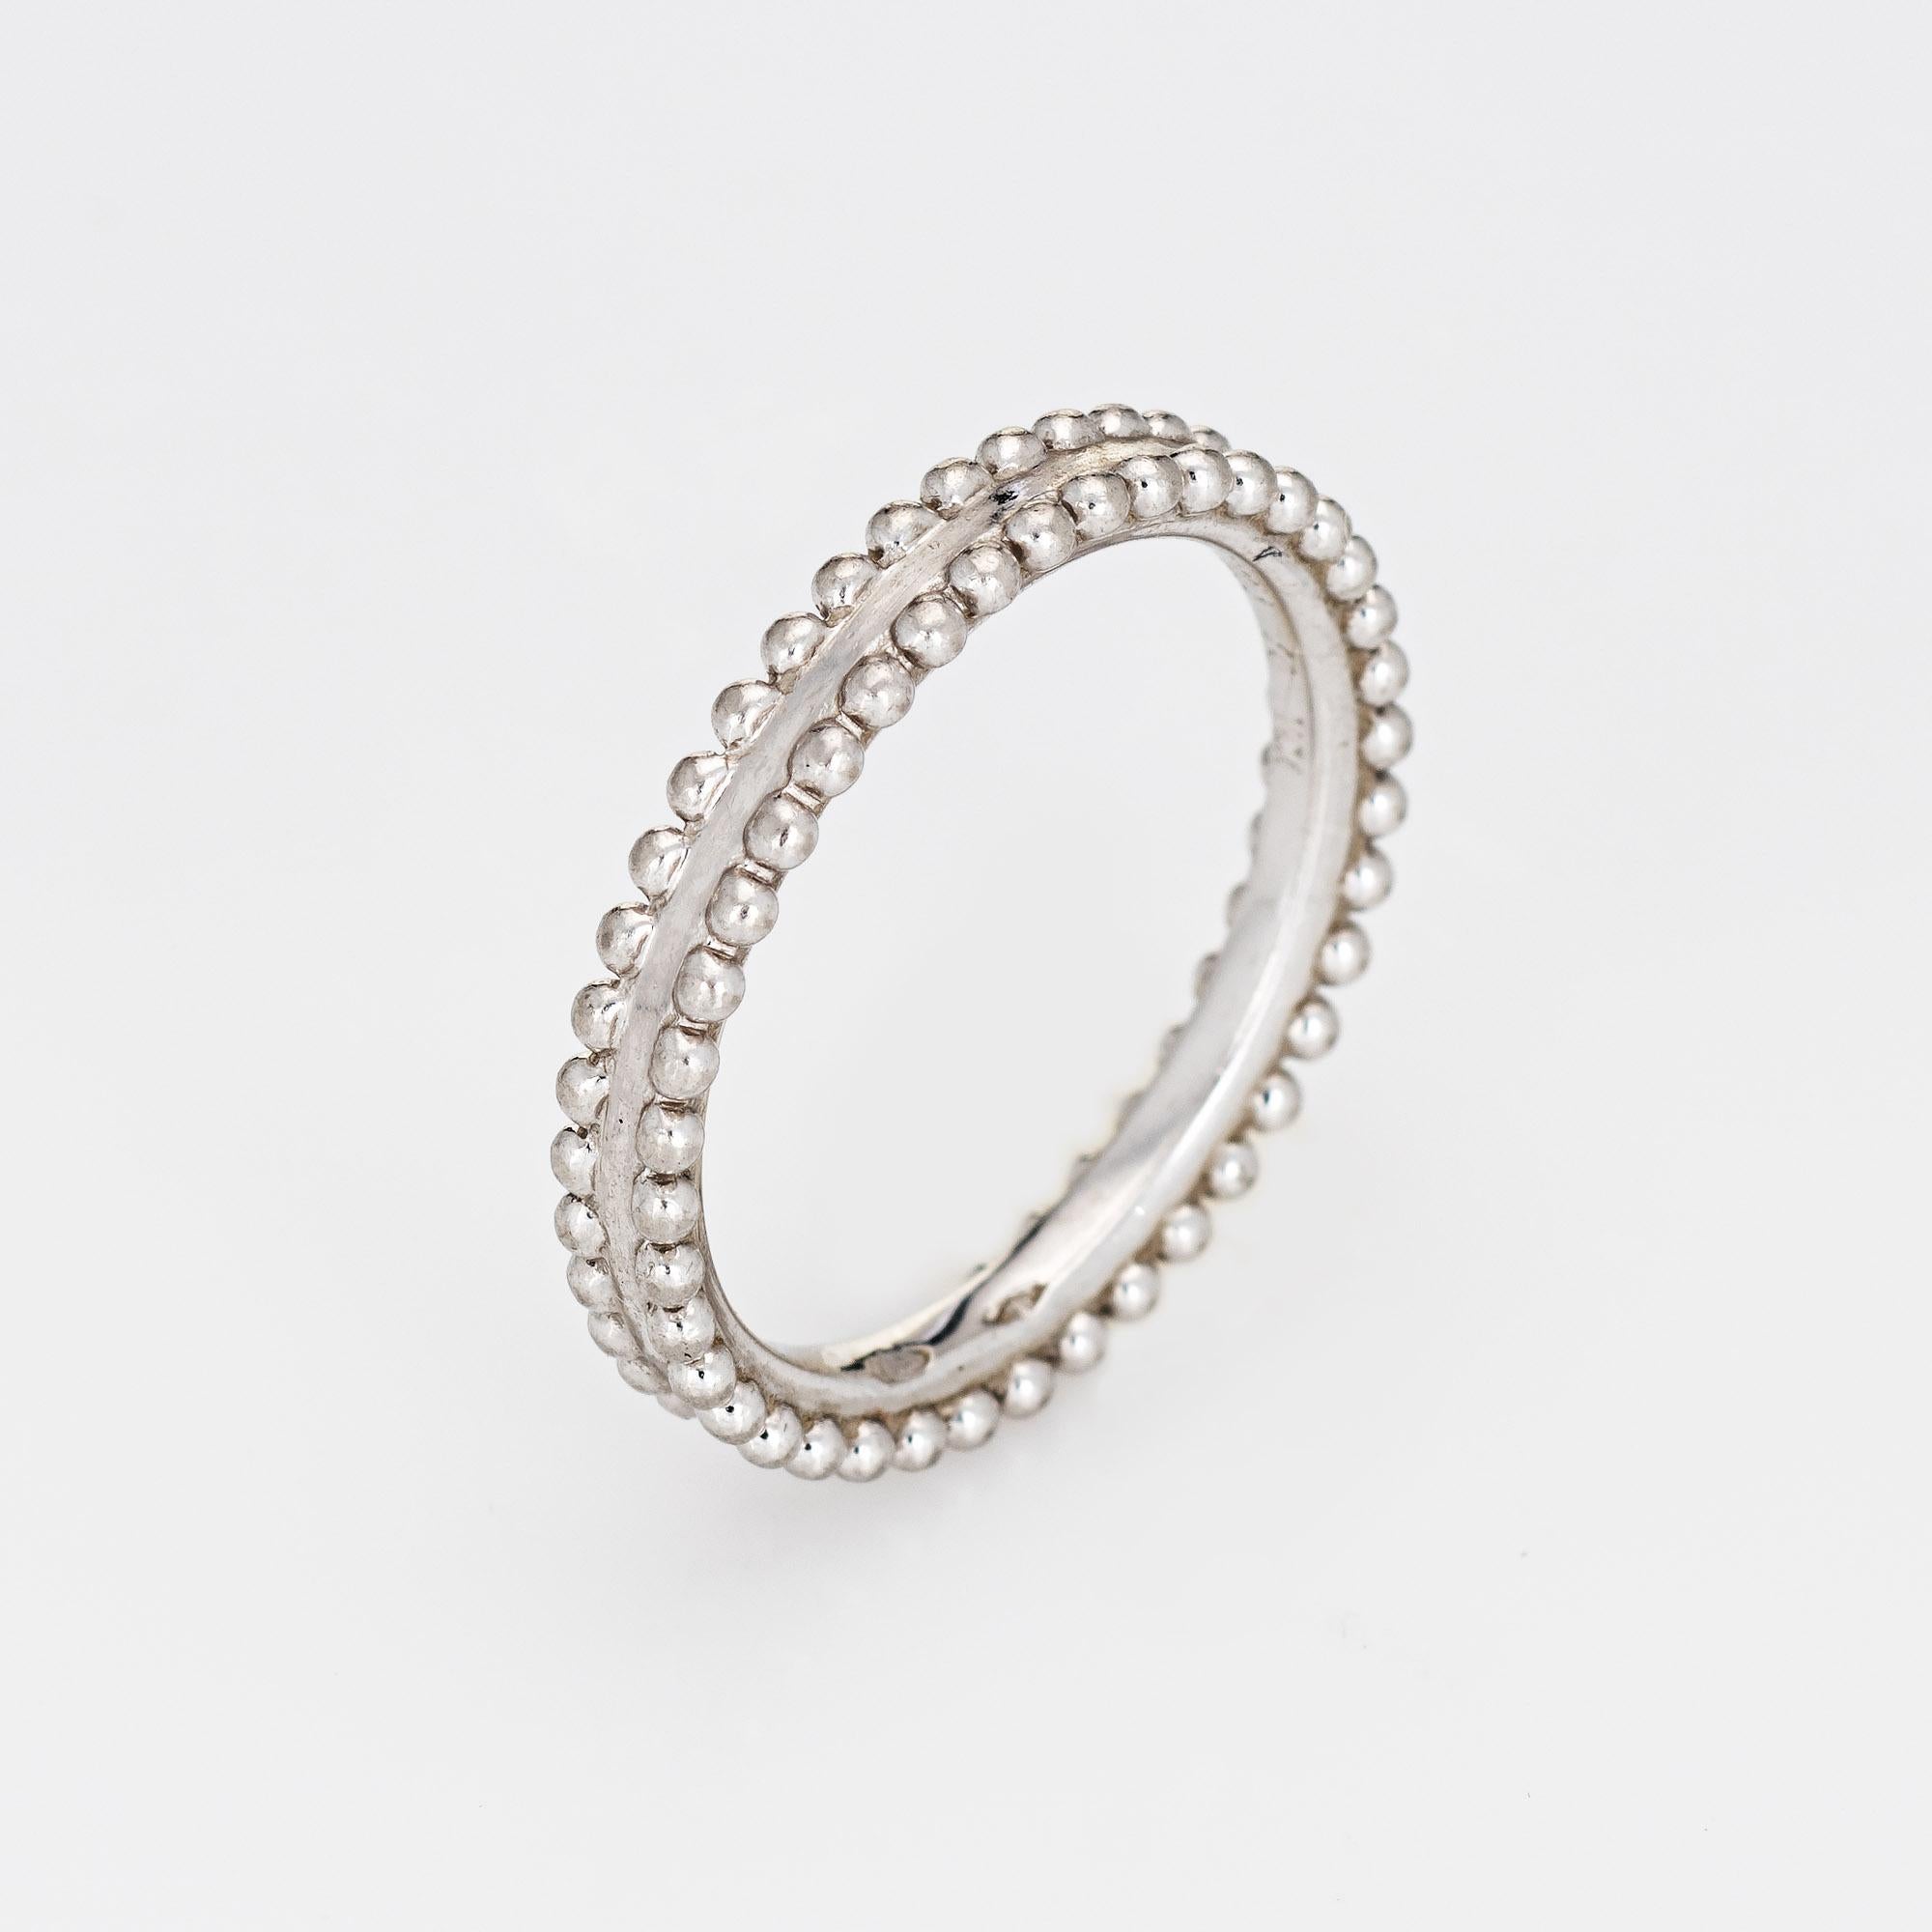 Pre-owned Van Cleef & Arpels 'Estelle' ring crafted in 950 platinum (circa 2000s).  

The Estelle ring is a celebration of its founder and first female figure, Estelle Arpels. The ring is delicately edged with platinum beads and emphasizes the